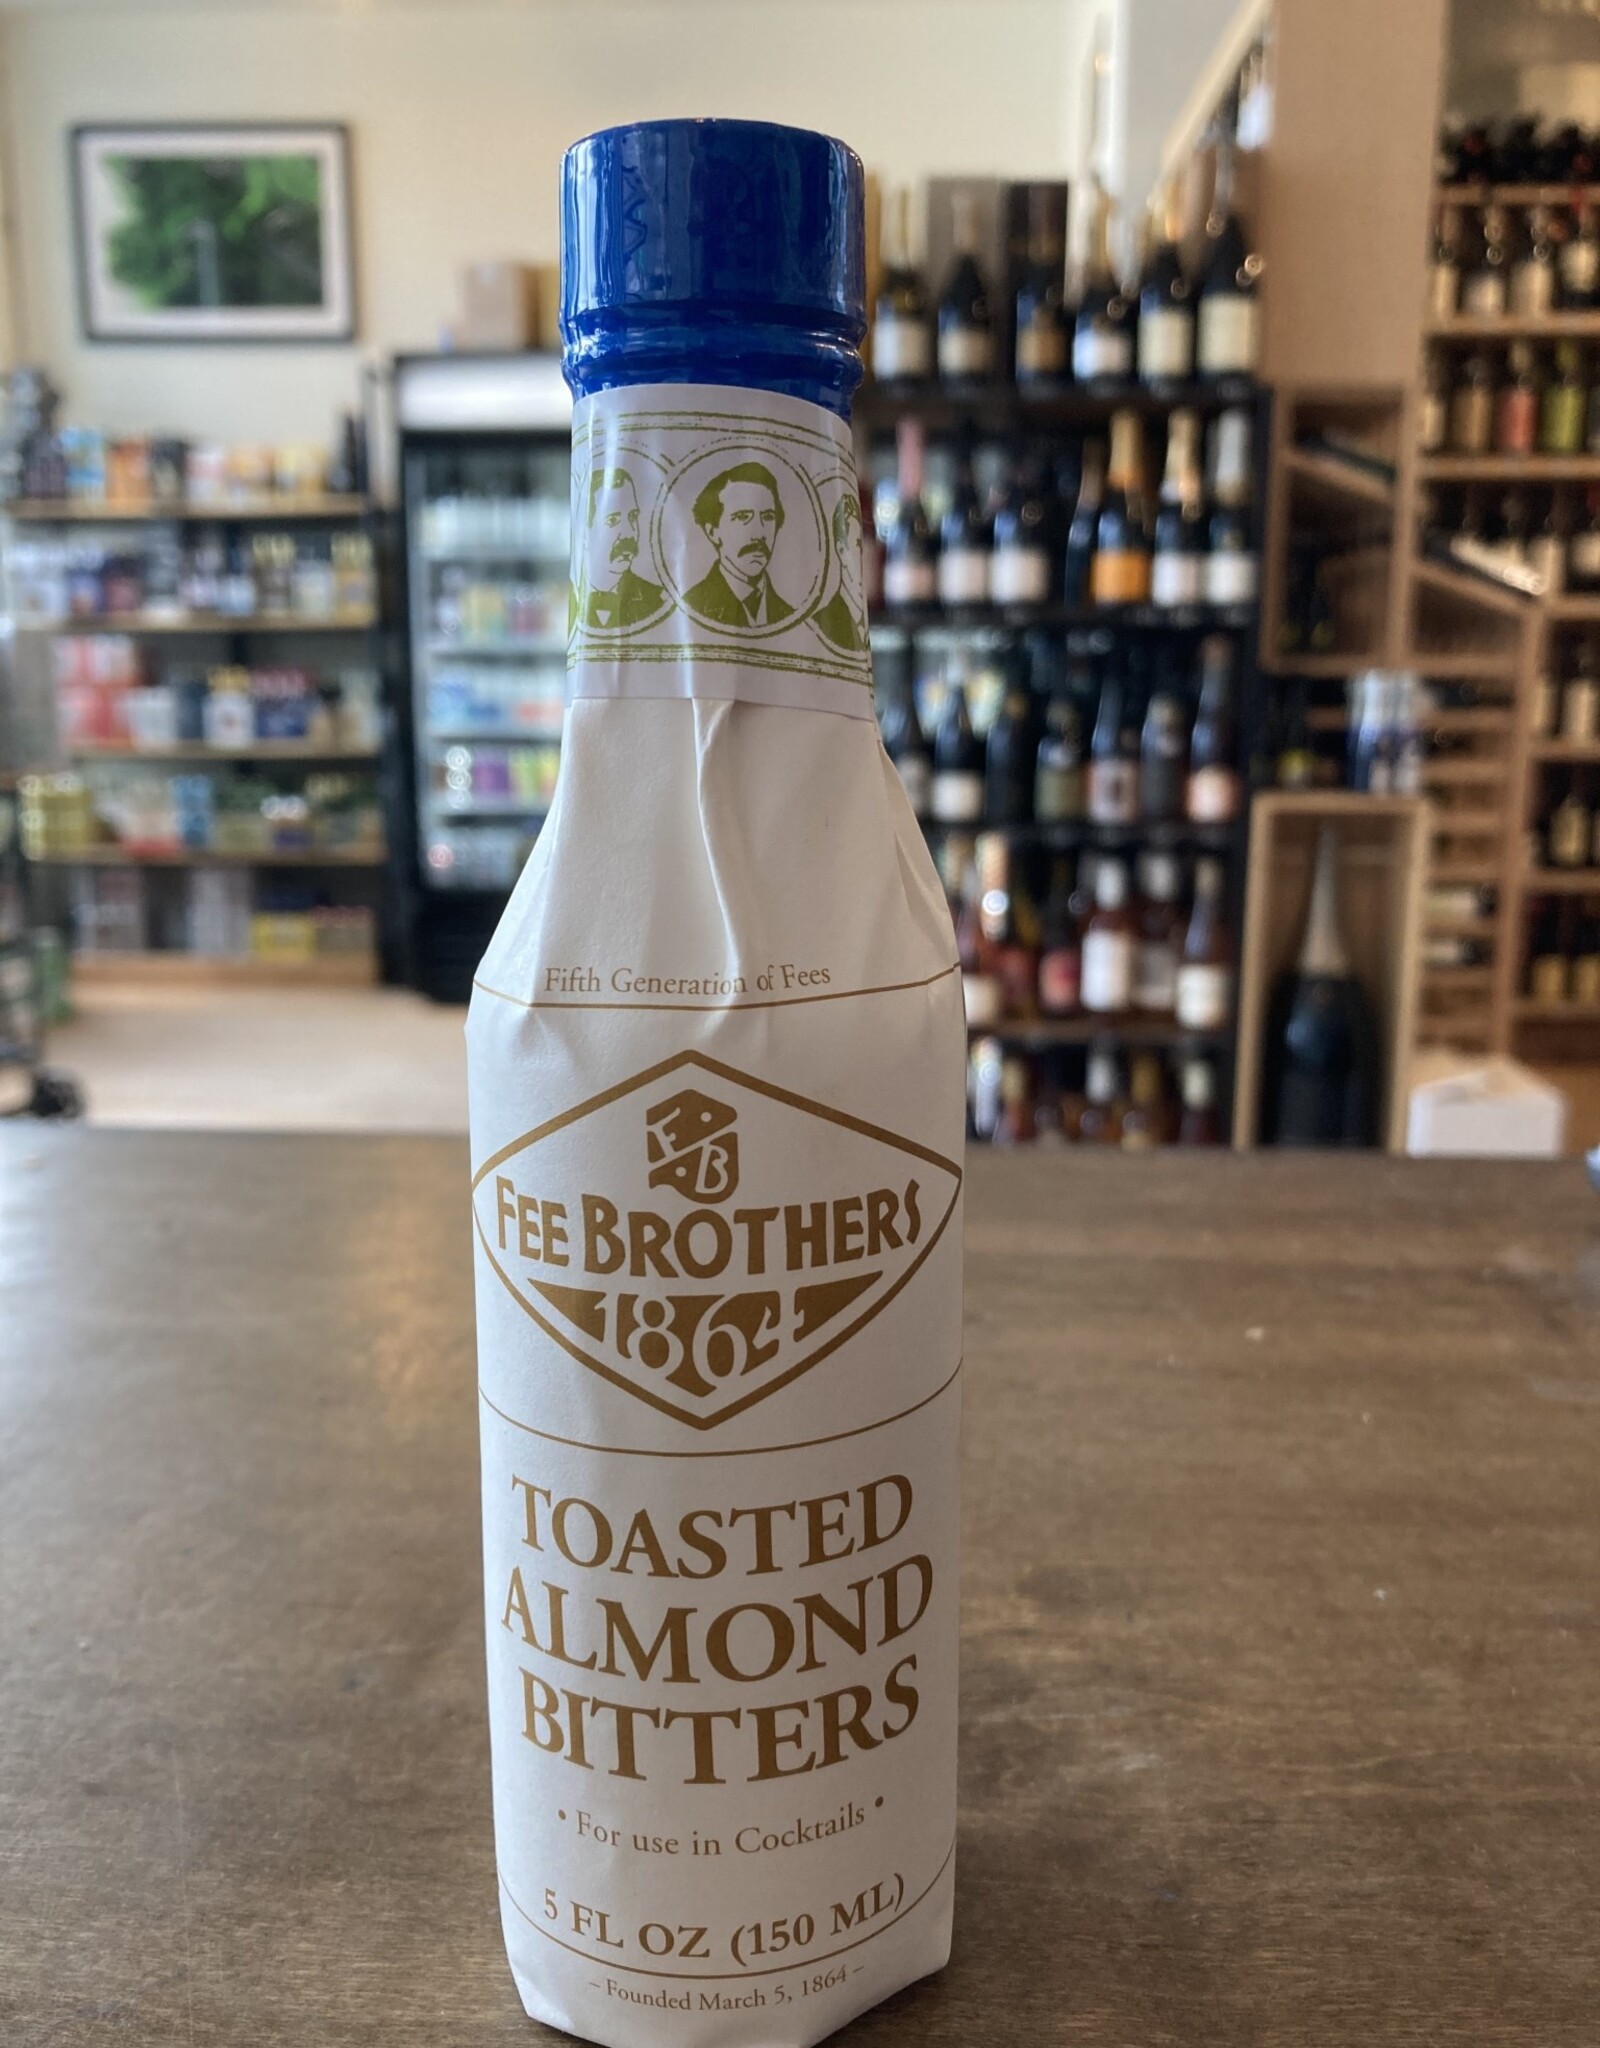 Fee Brothers Fee Brothers Toasted Almond Bitters